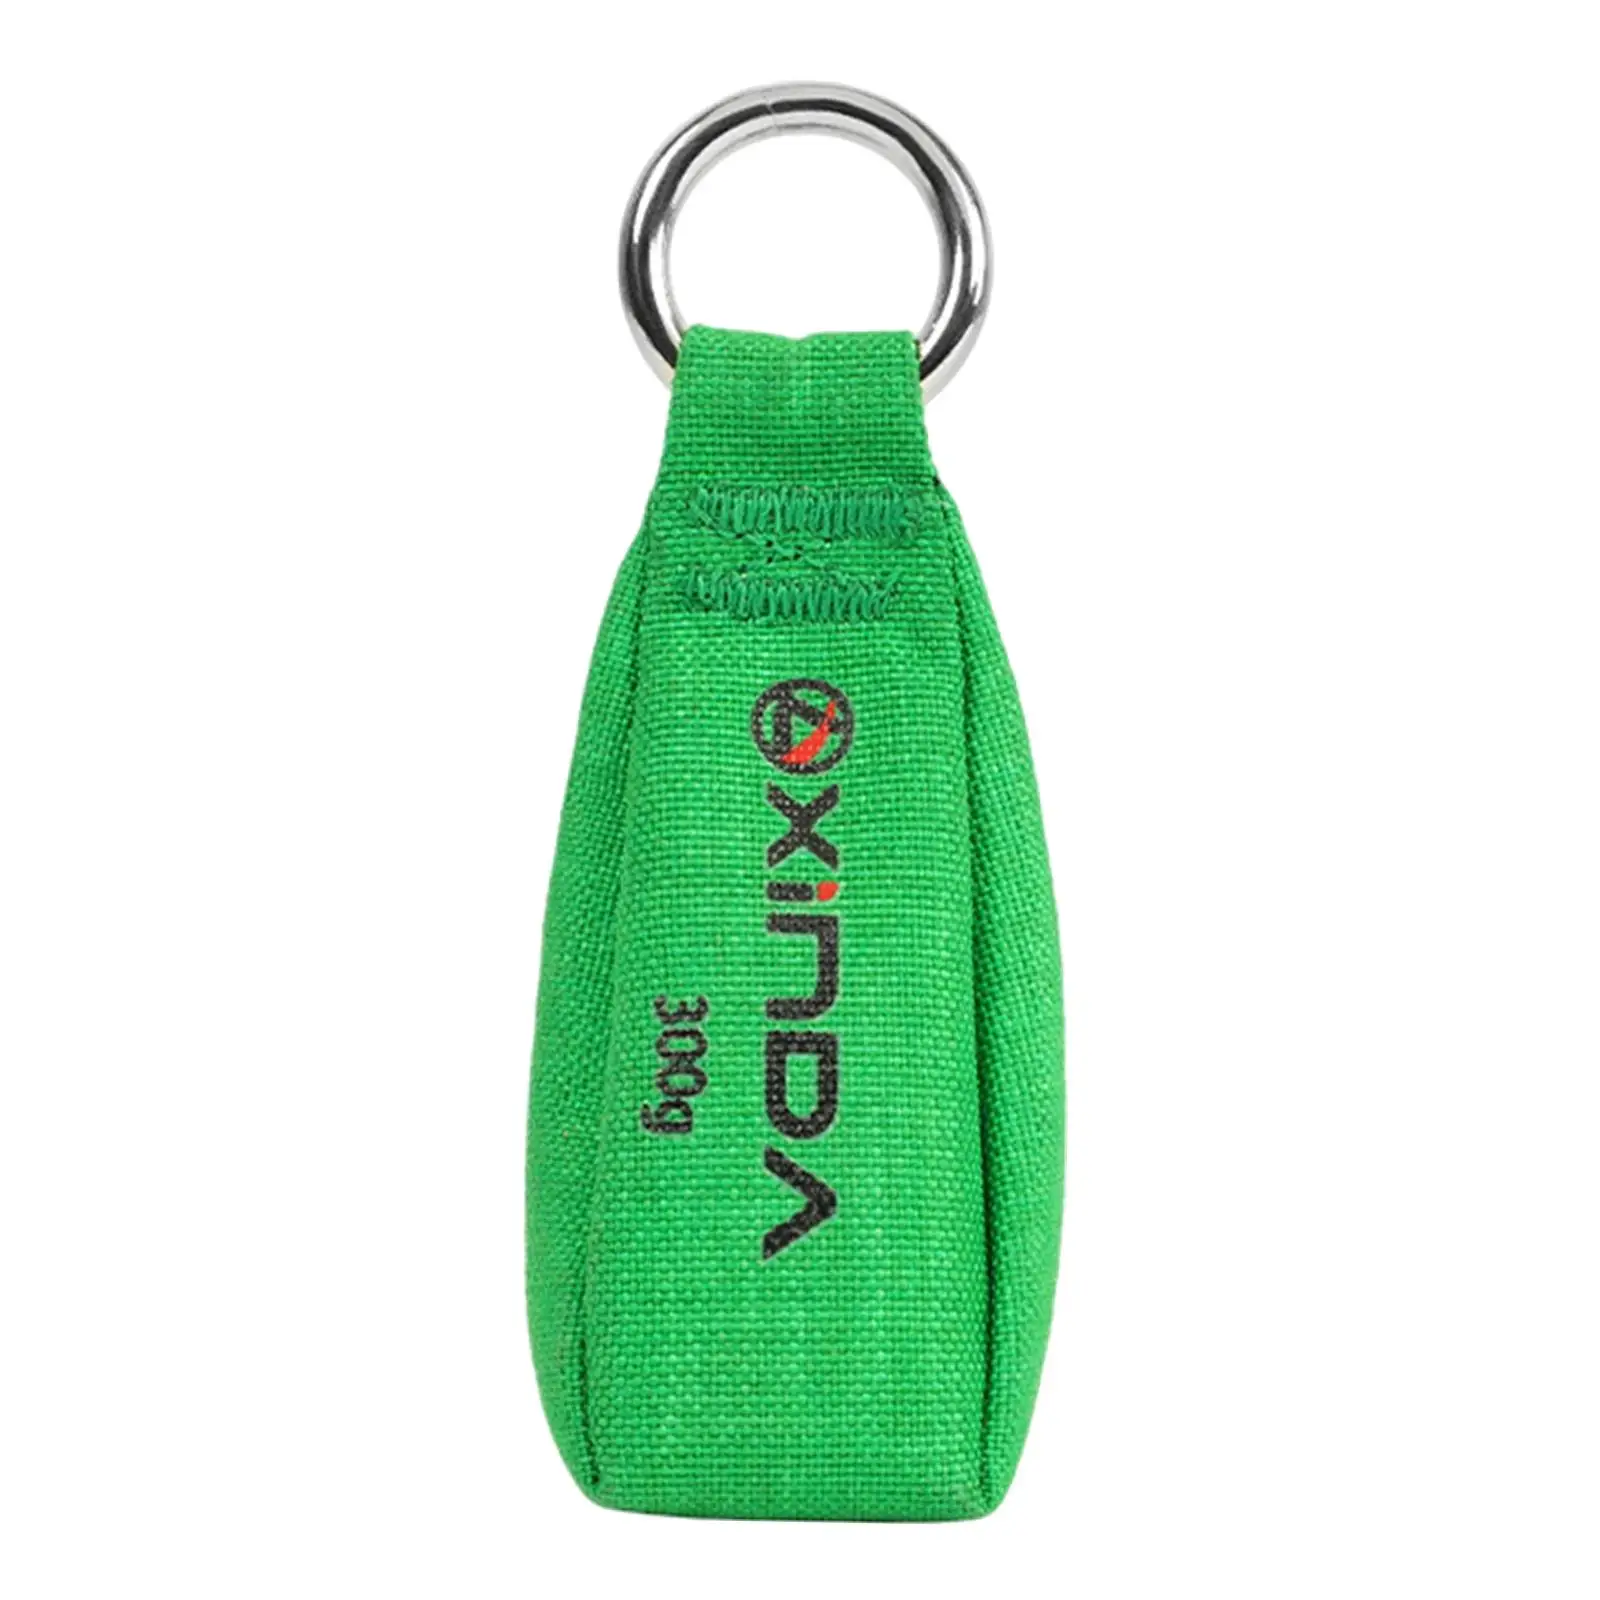 Throw Weight Nylon Fabric with Metal Loop Throwing Bag for Mountaineering Tree